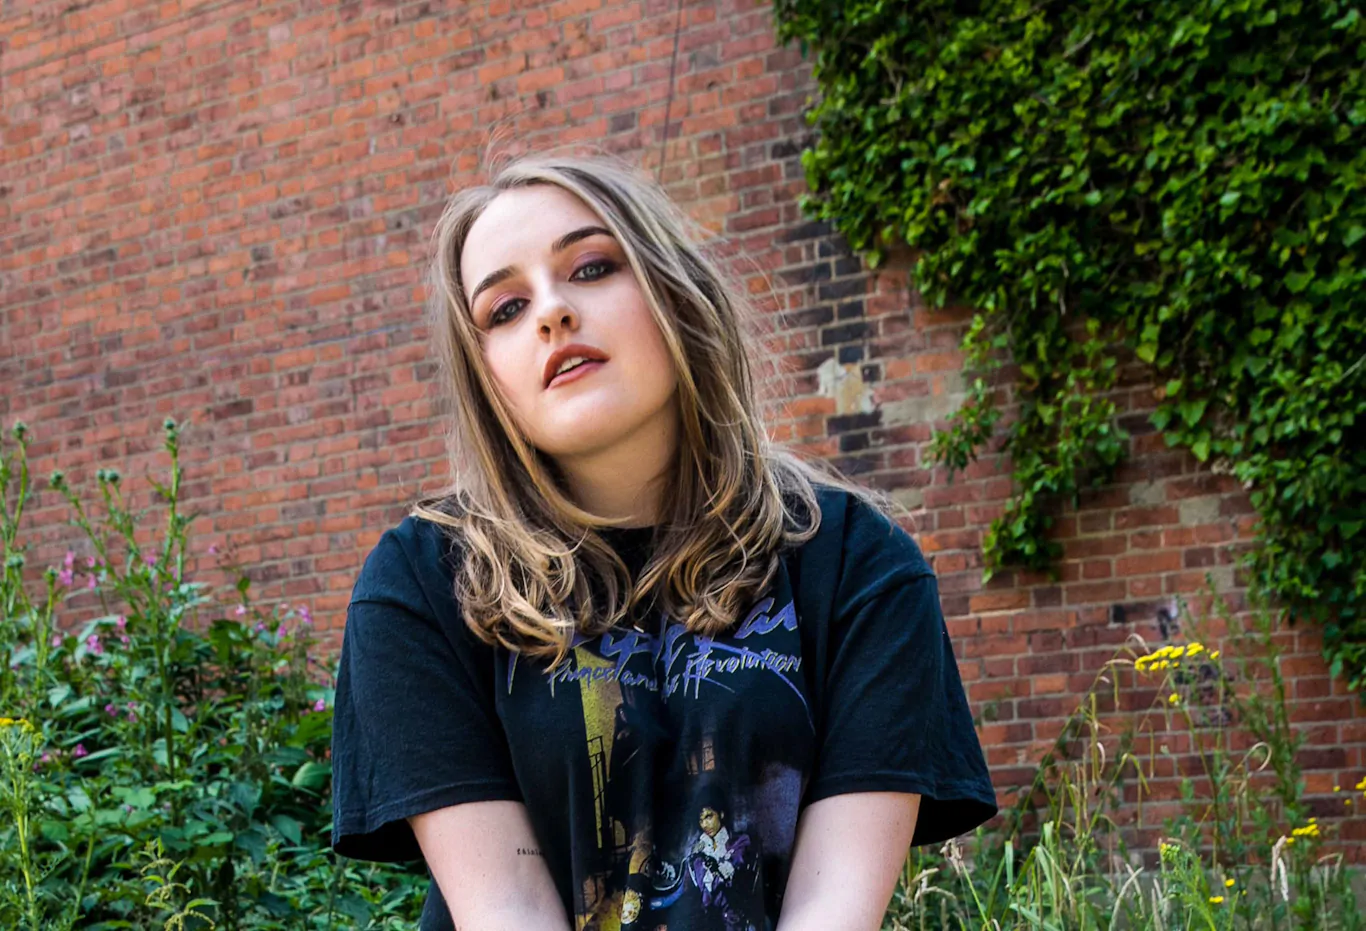 NELL MESCAL announces headline Belfast show at Oh Yeah Music Centre on March 2nd